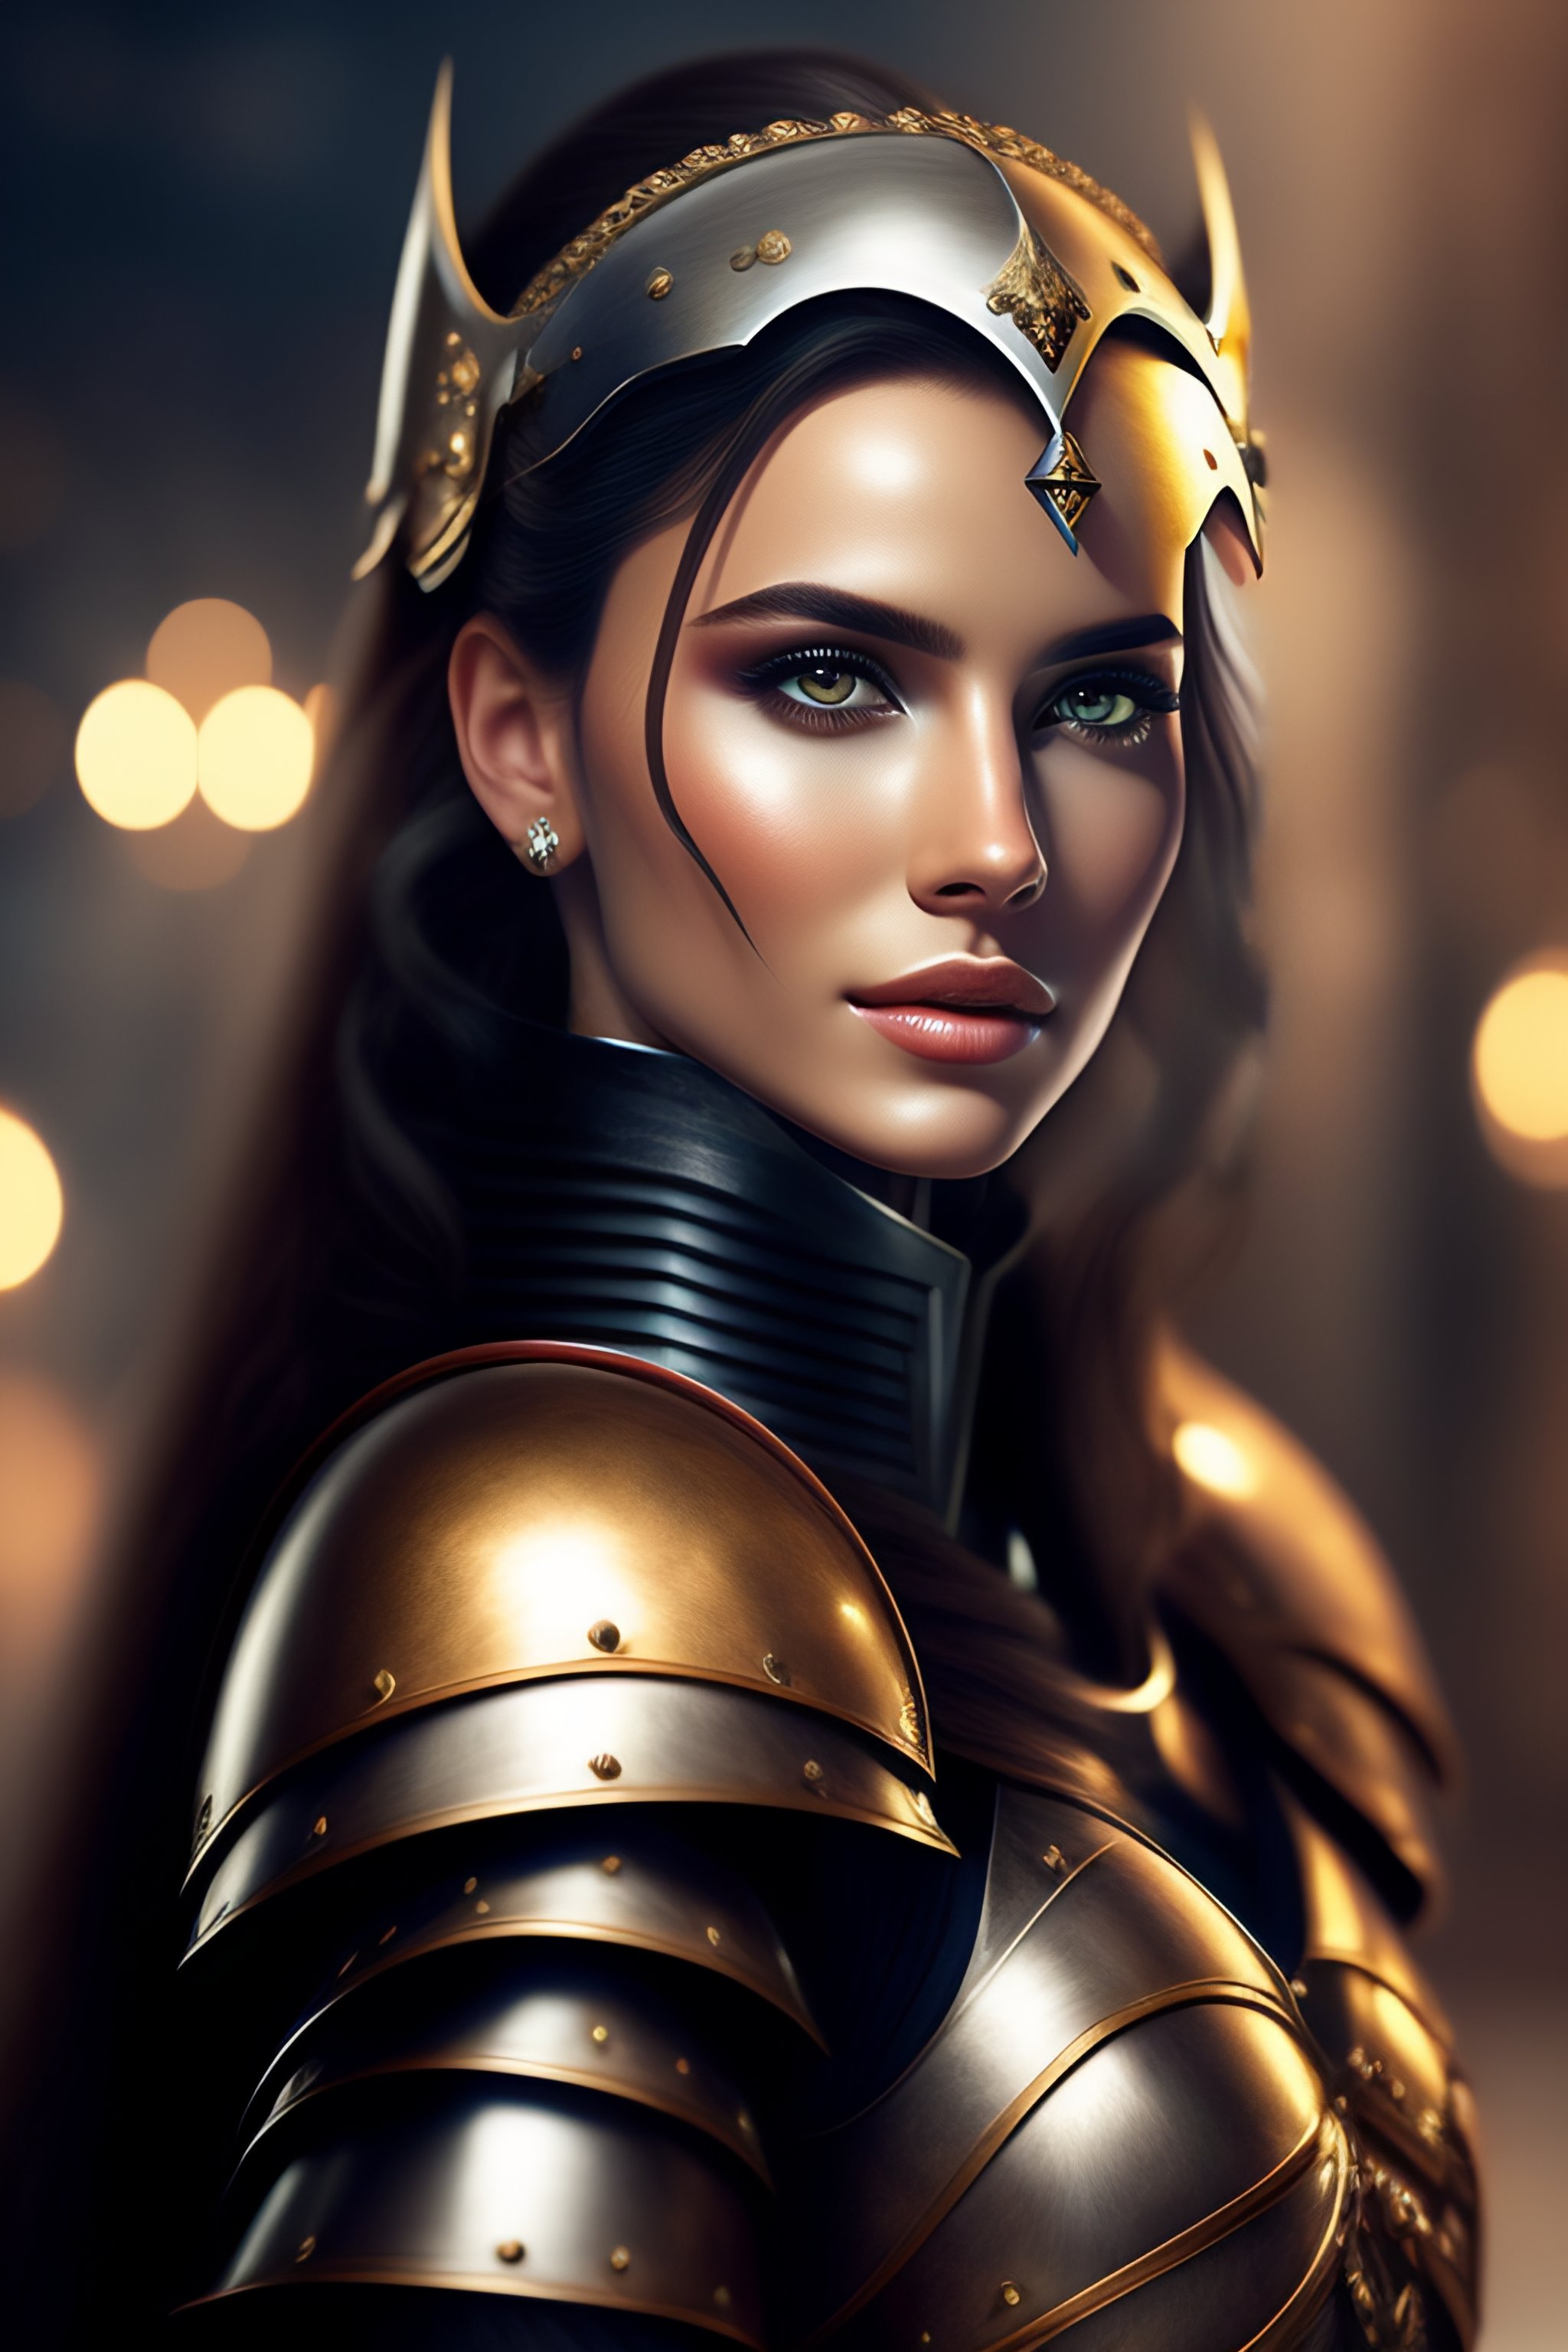 Lexica - Beautifull girl with knight armor